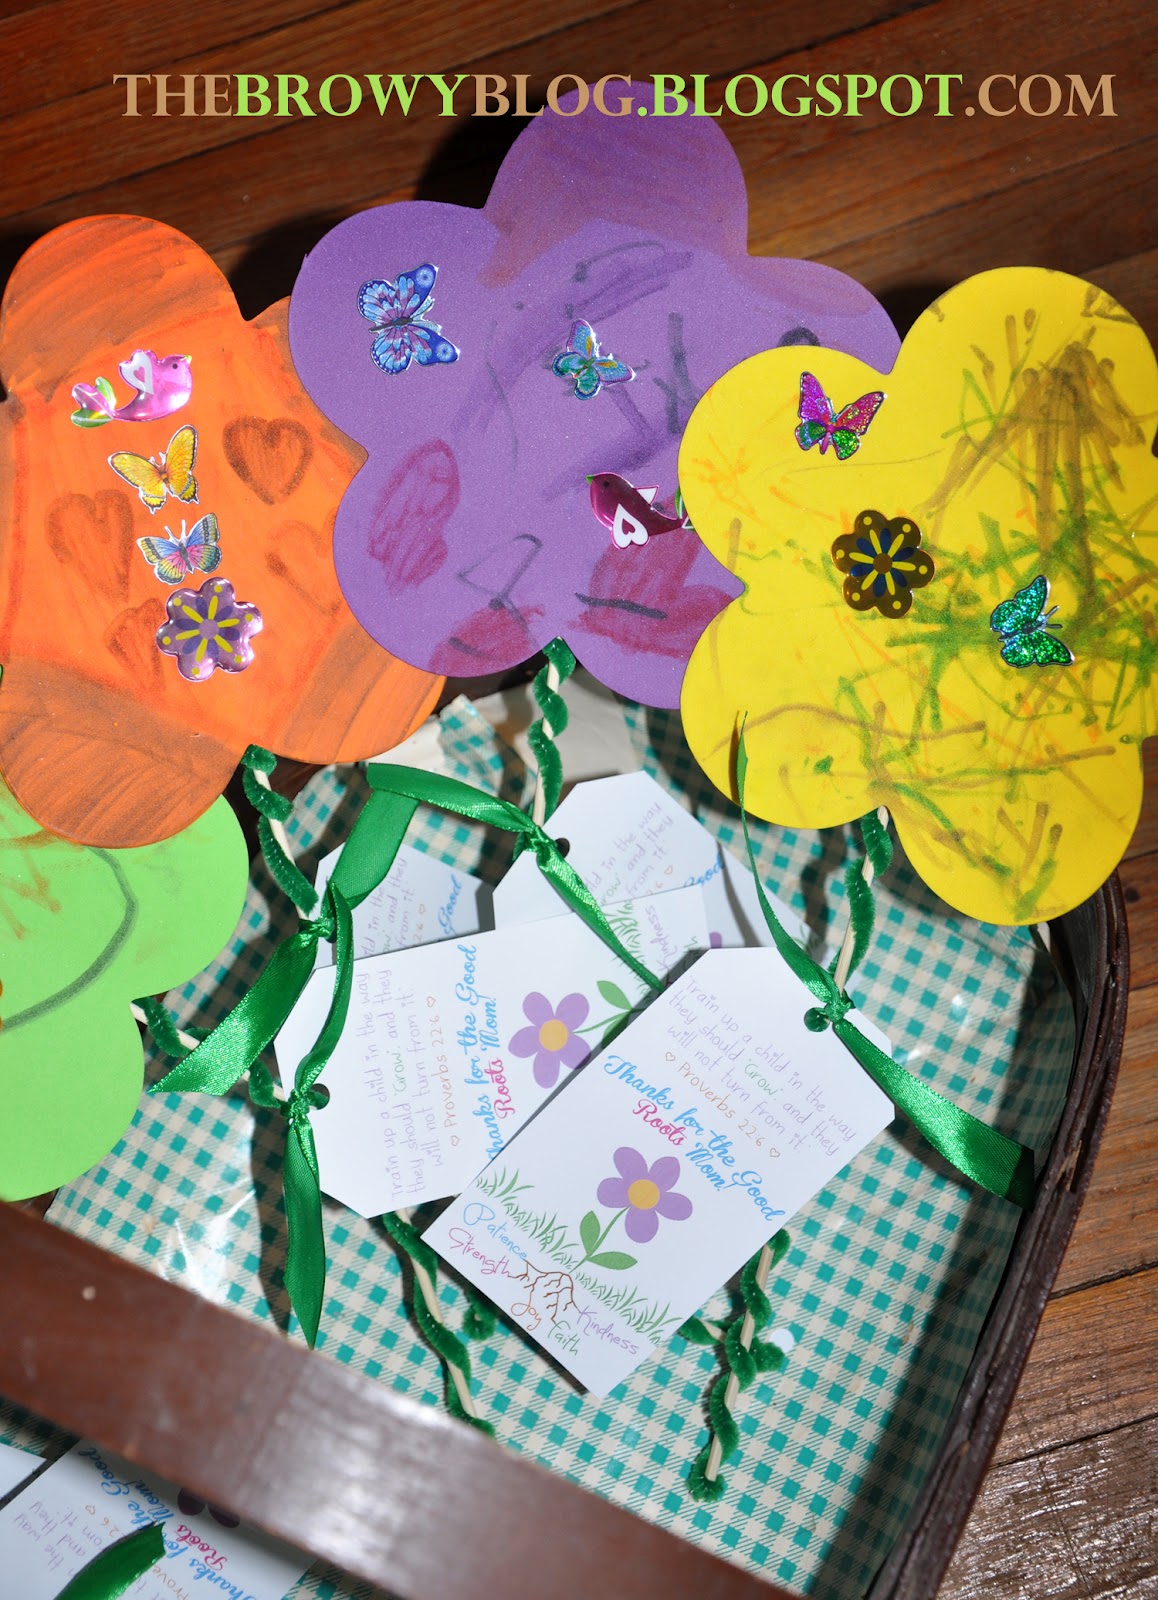 The Browy Blog: Mother's Day Sunday School Craft